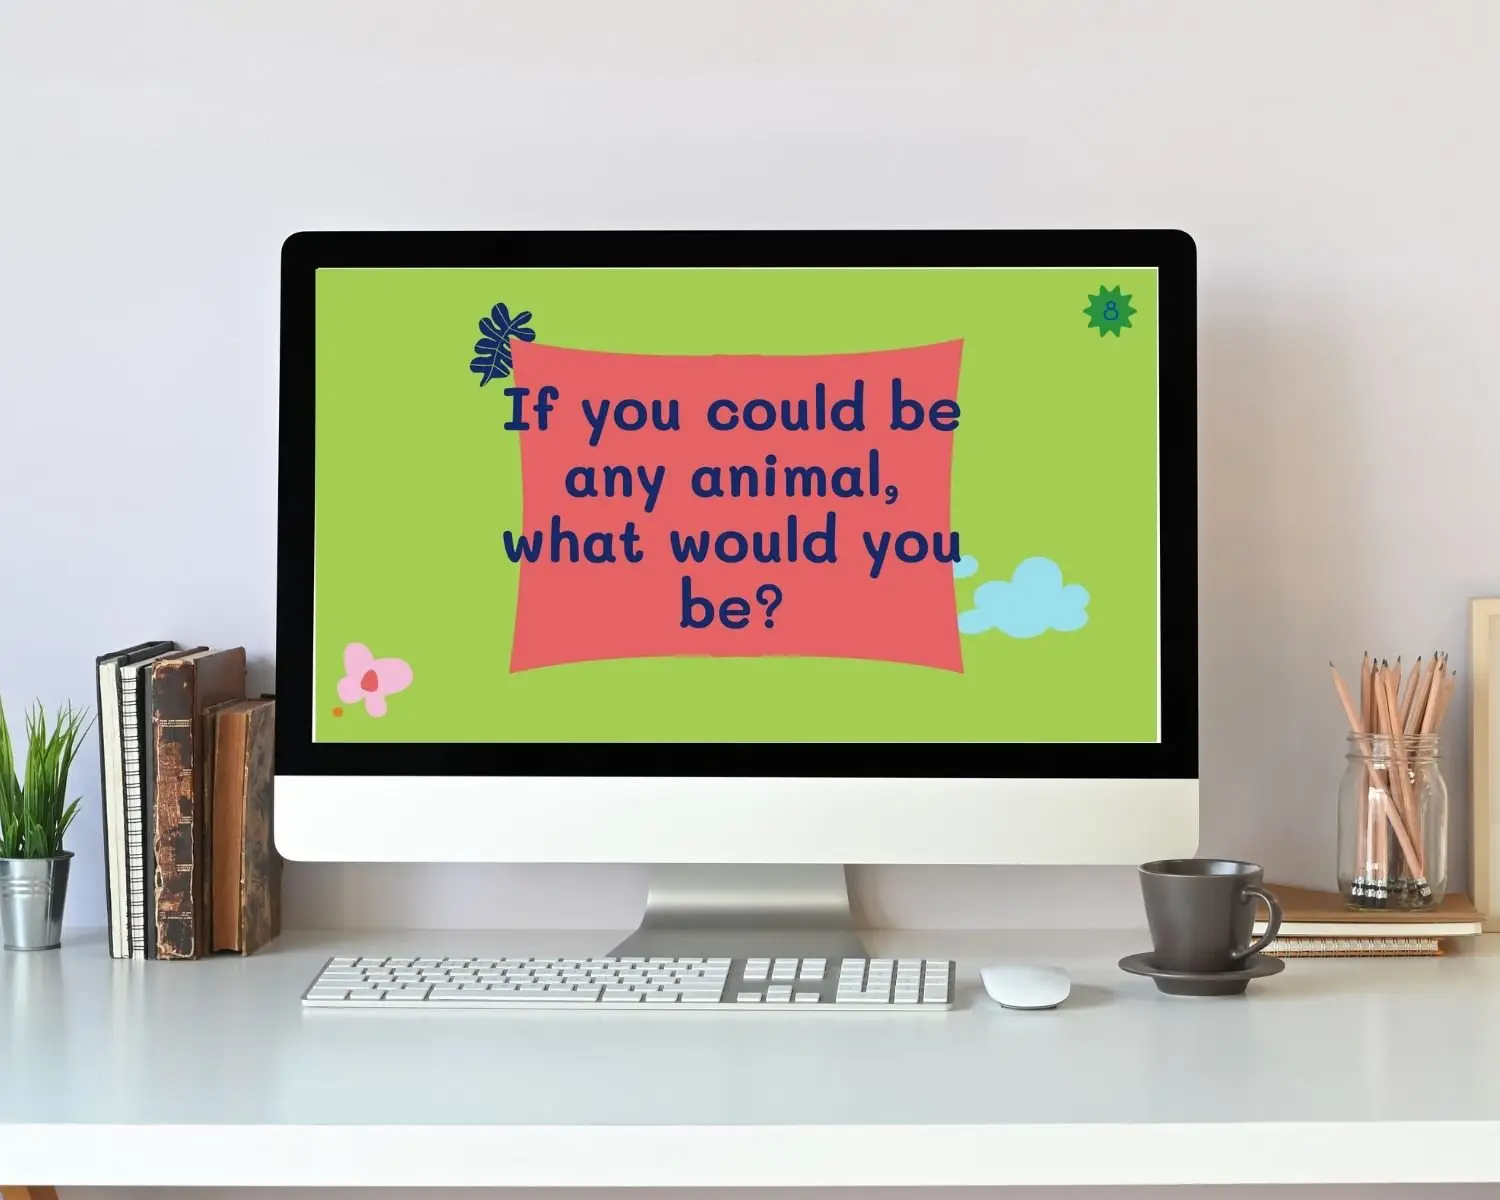 "If you could be any animal, what would you be" virtual kids' conversation card game question is shown on a computer